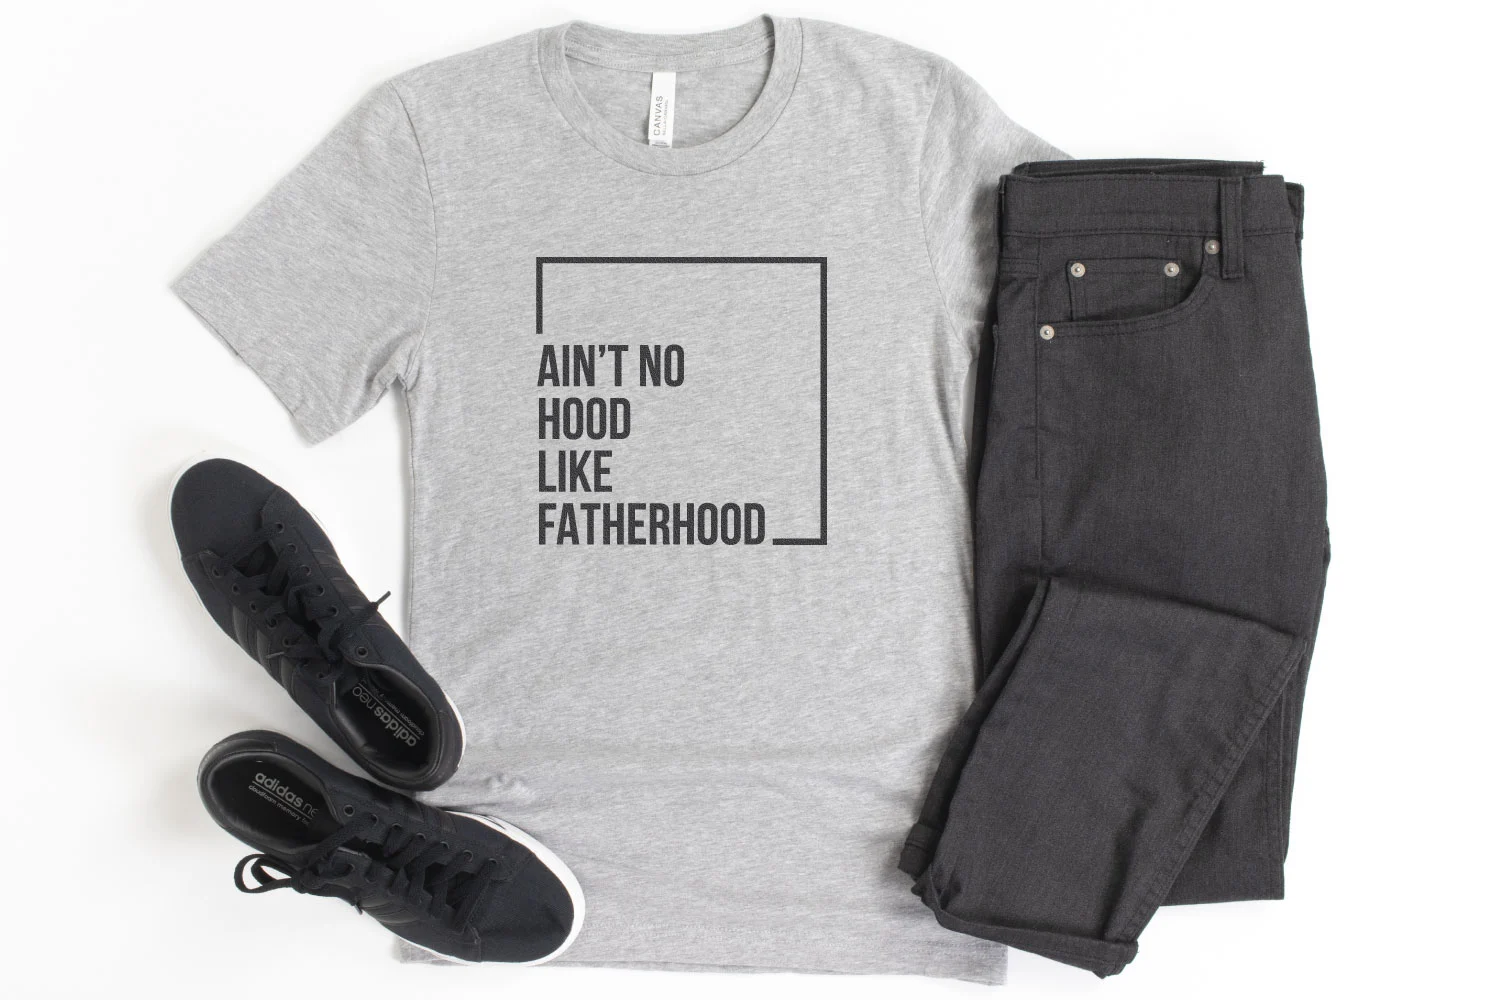 Flat lay with a gray t-shirt and a design that reads "ain't no hood like a fatherhood".